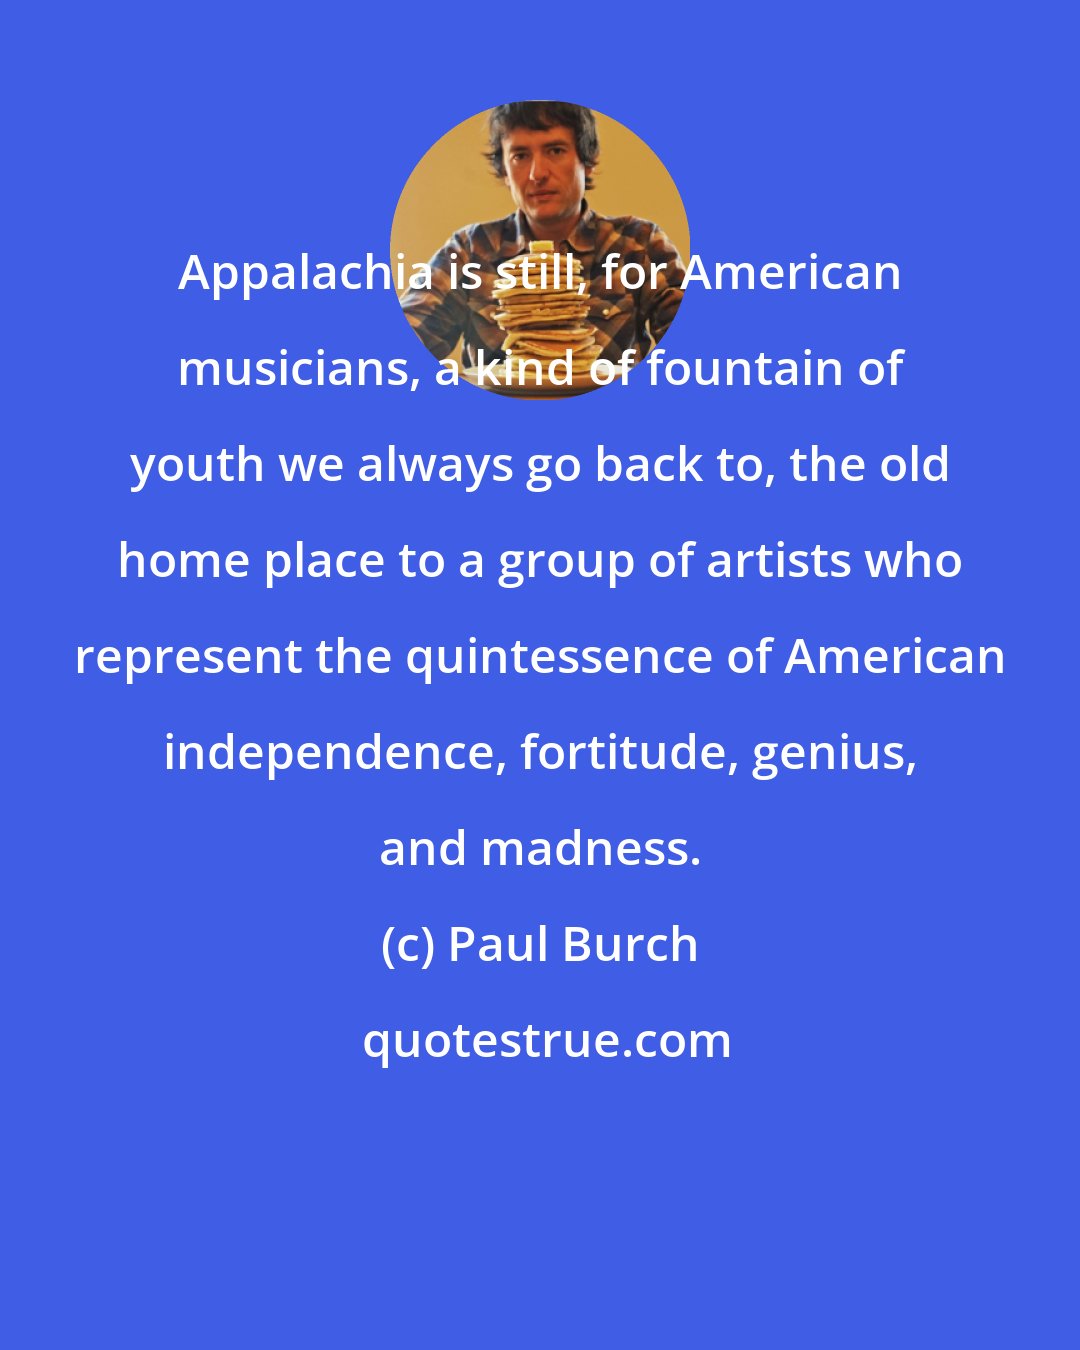 Paul Burch: Appalachia is still, for American musicians, a kind of fountain of youth we always go back to, the old home place to a group of artists who represent the quintessence of American independence, fortitude, genius, and madness.